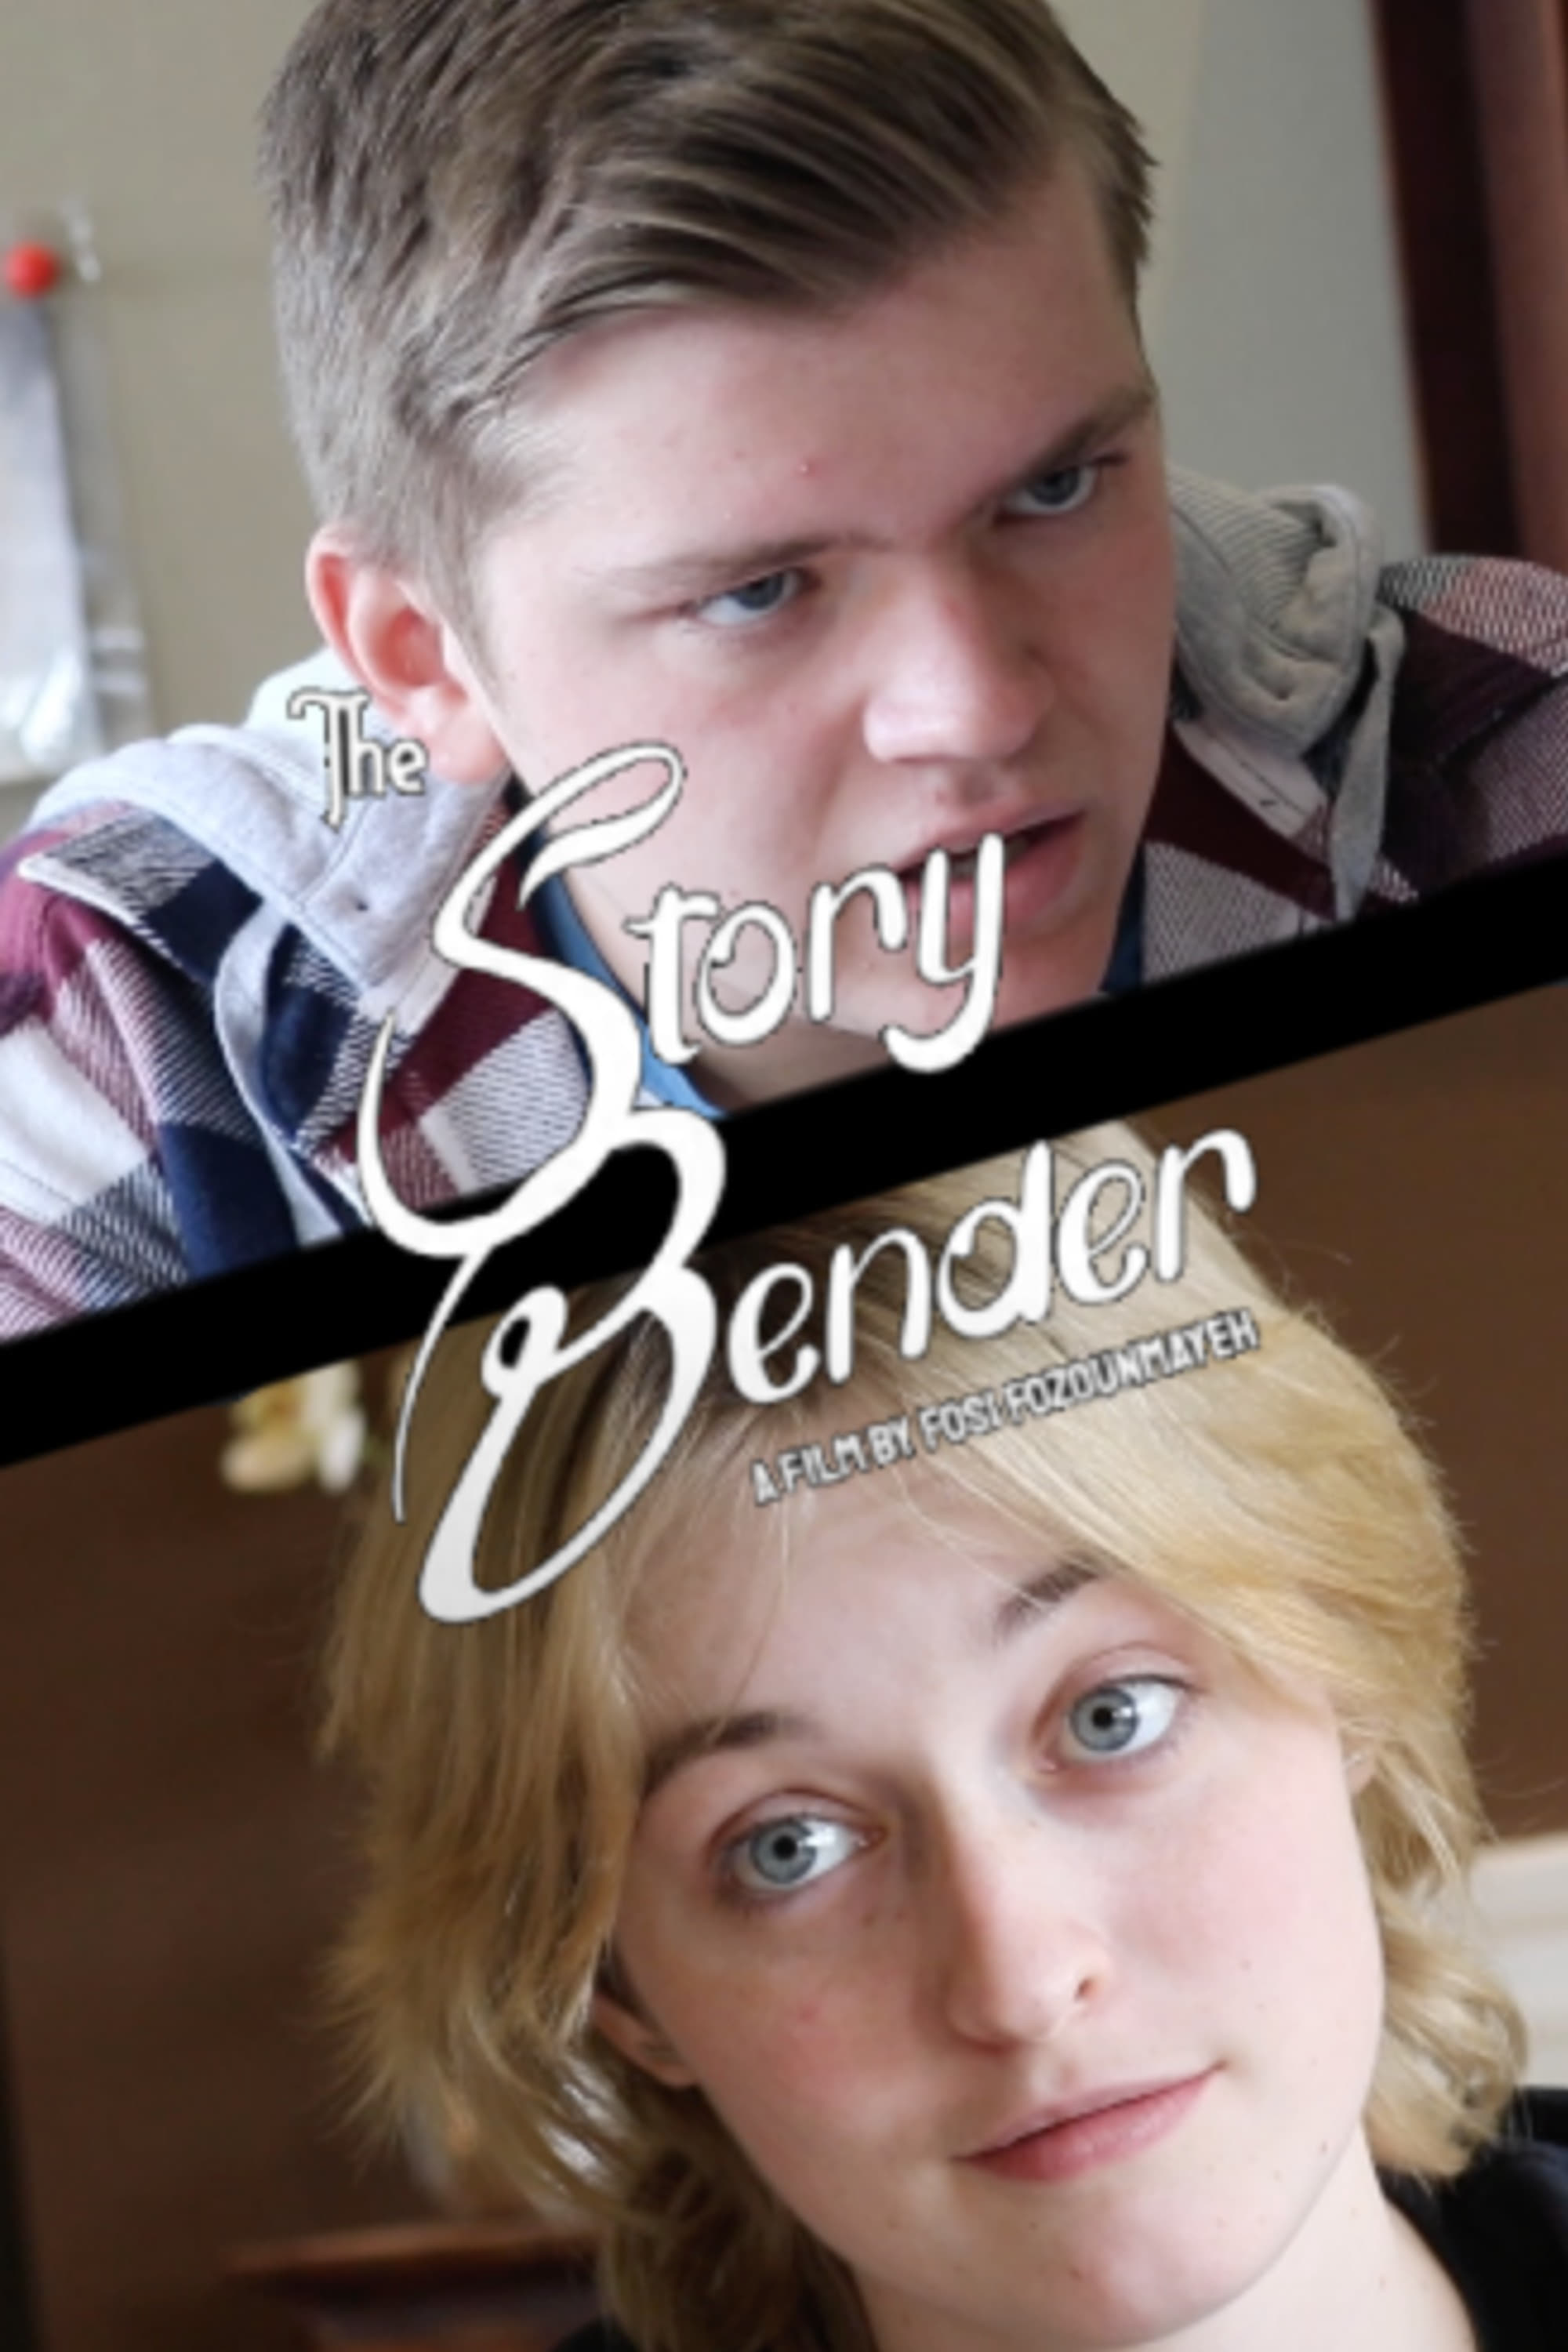 The Story Bender